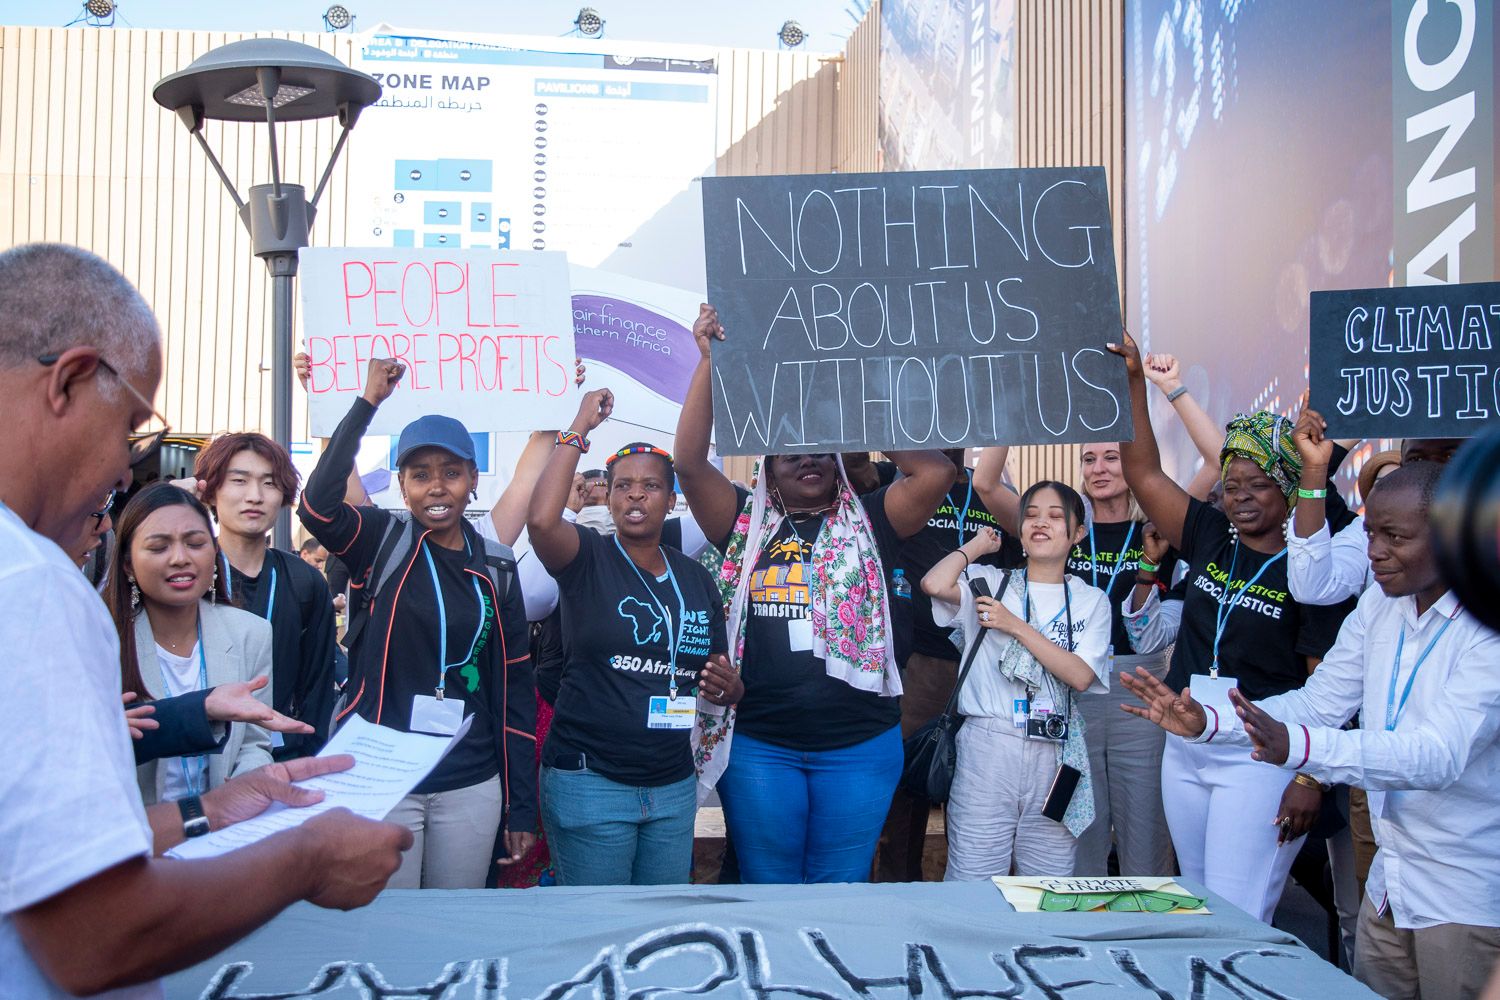 A group of protestors at COP27 in Sharm el Sheikh, Egypt, chanted 'nothing about us without us' in reference to BIPOC communities often being ignored by stakeholders in climate finance discussions during the conference in November 2022. (Courtesy of Kate Fenske)